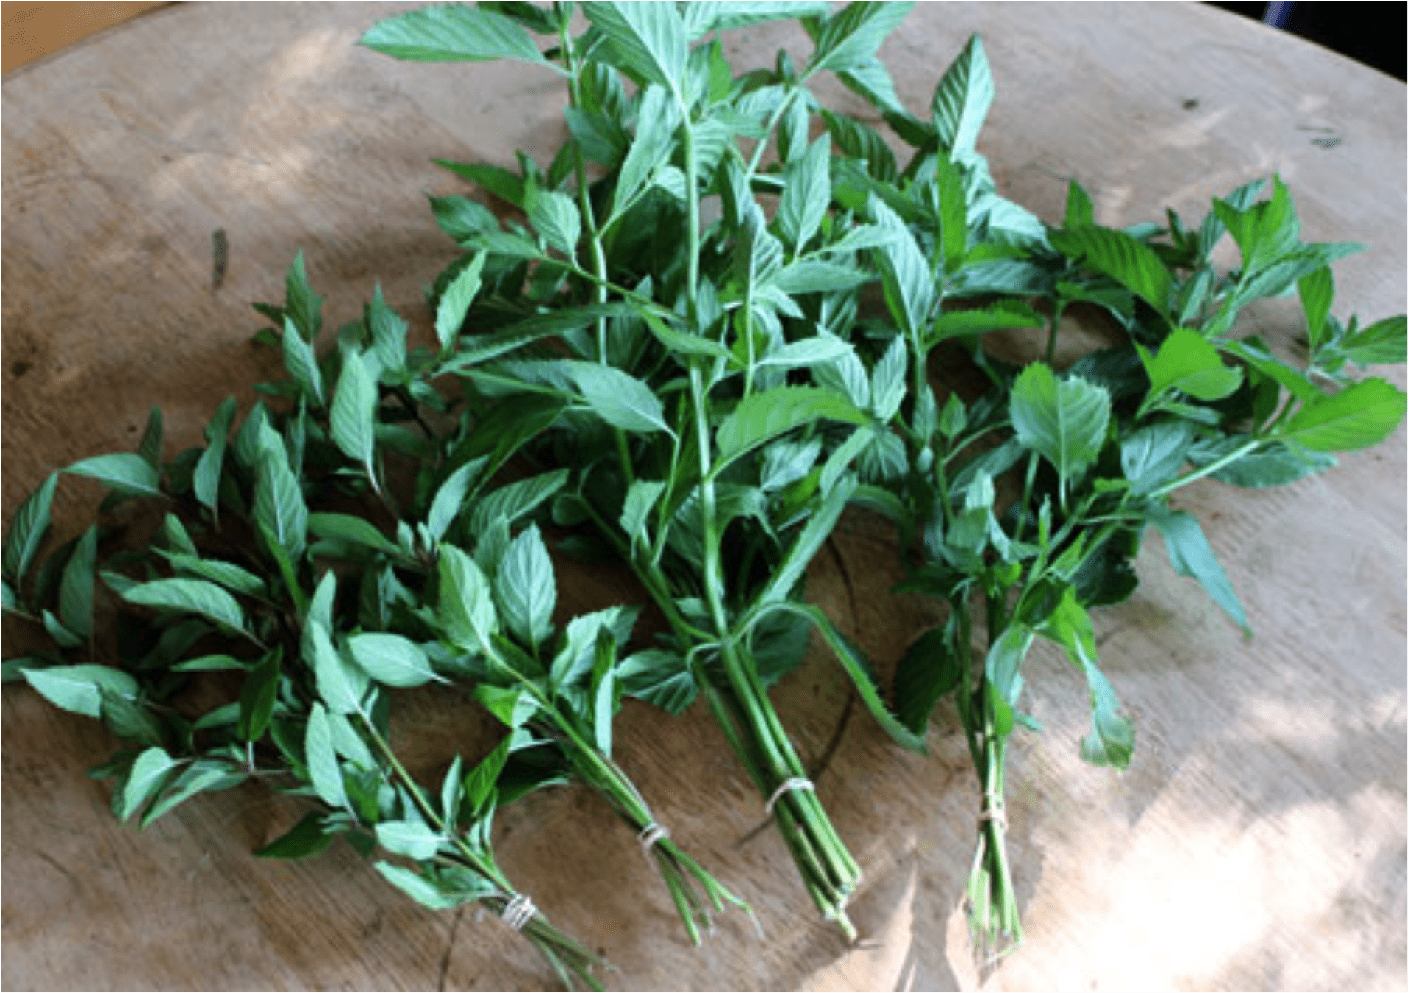 Drying mint is a great way to preserve this fresh herb for enjoying in teas | Homestead Honey